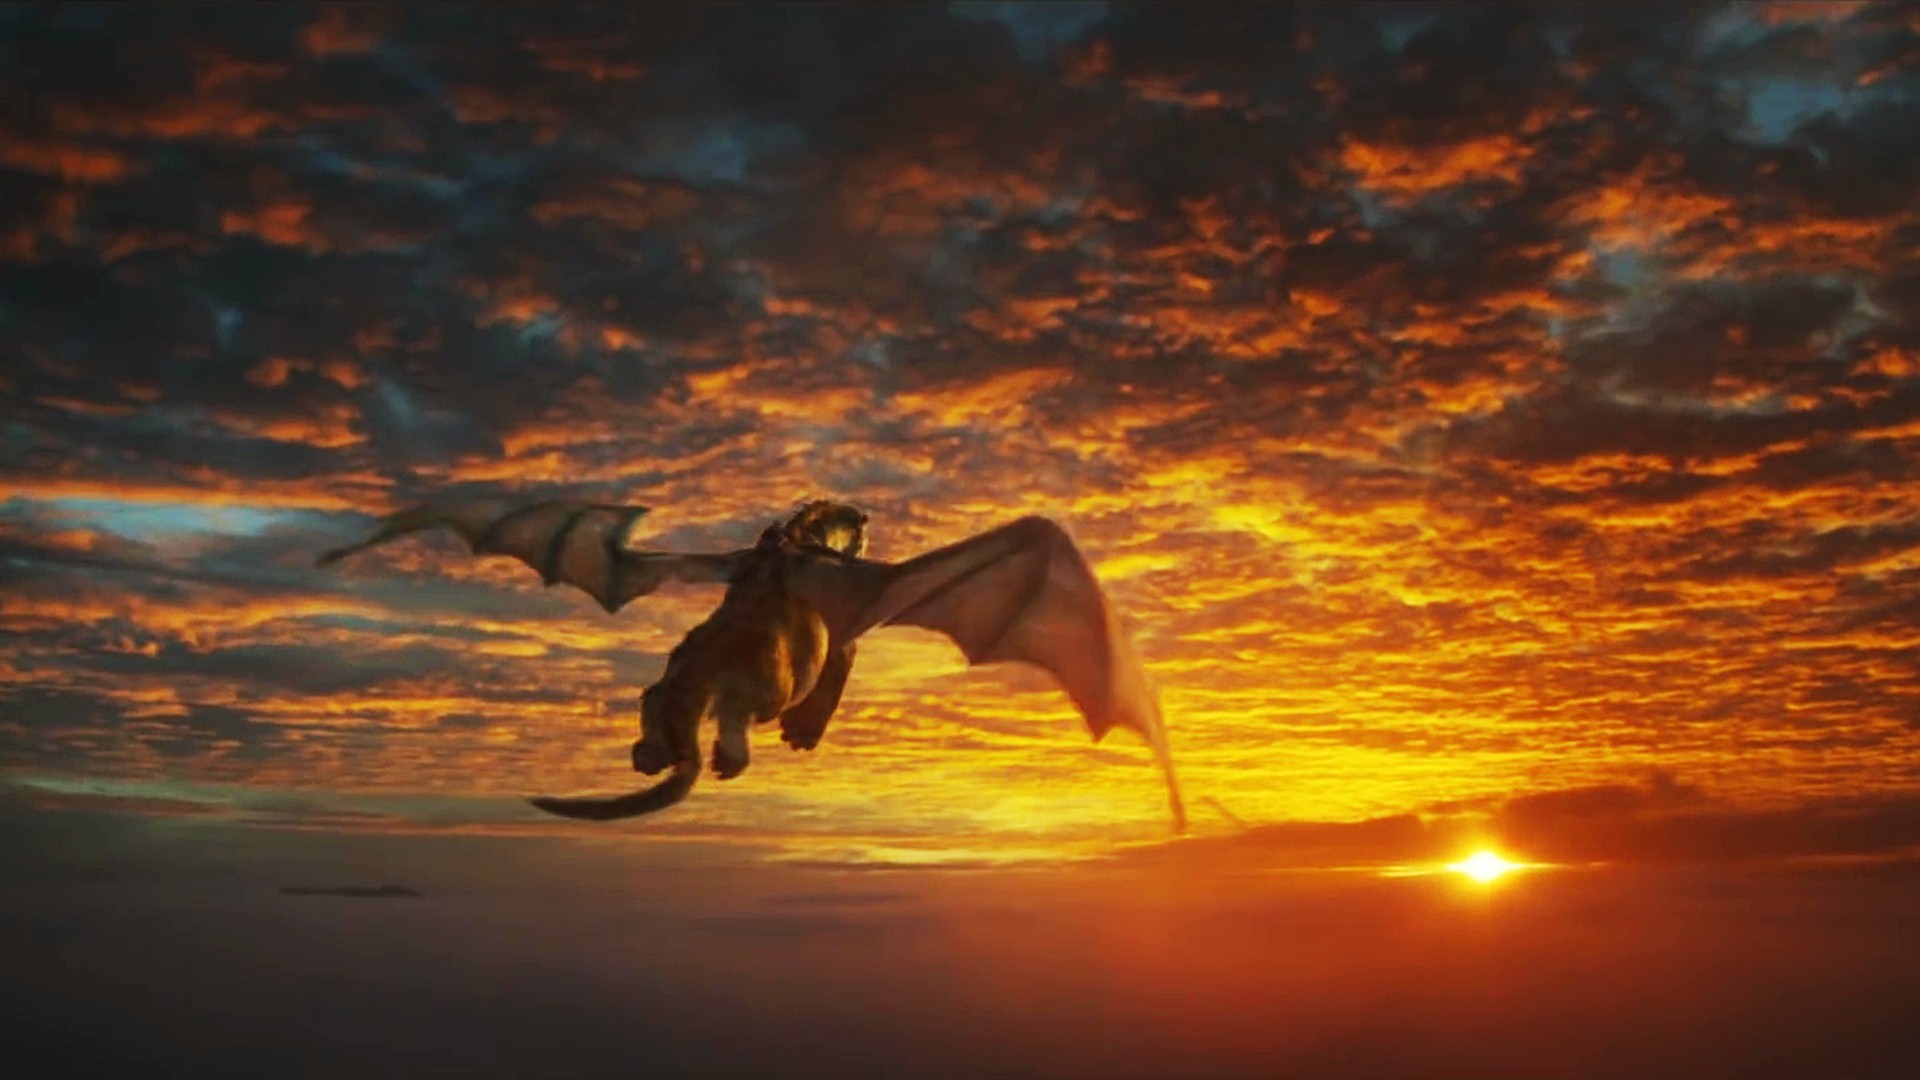 1920x1080 ... dragon pic wallpapers 31 wallpapers adorable wallpapers ...